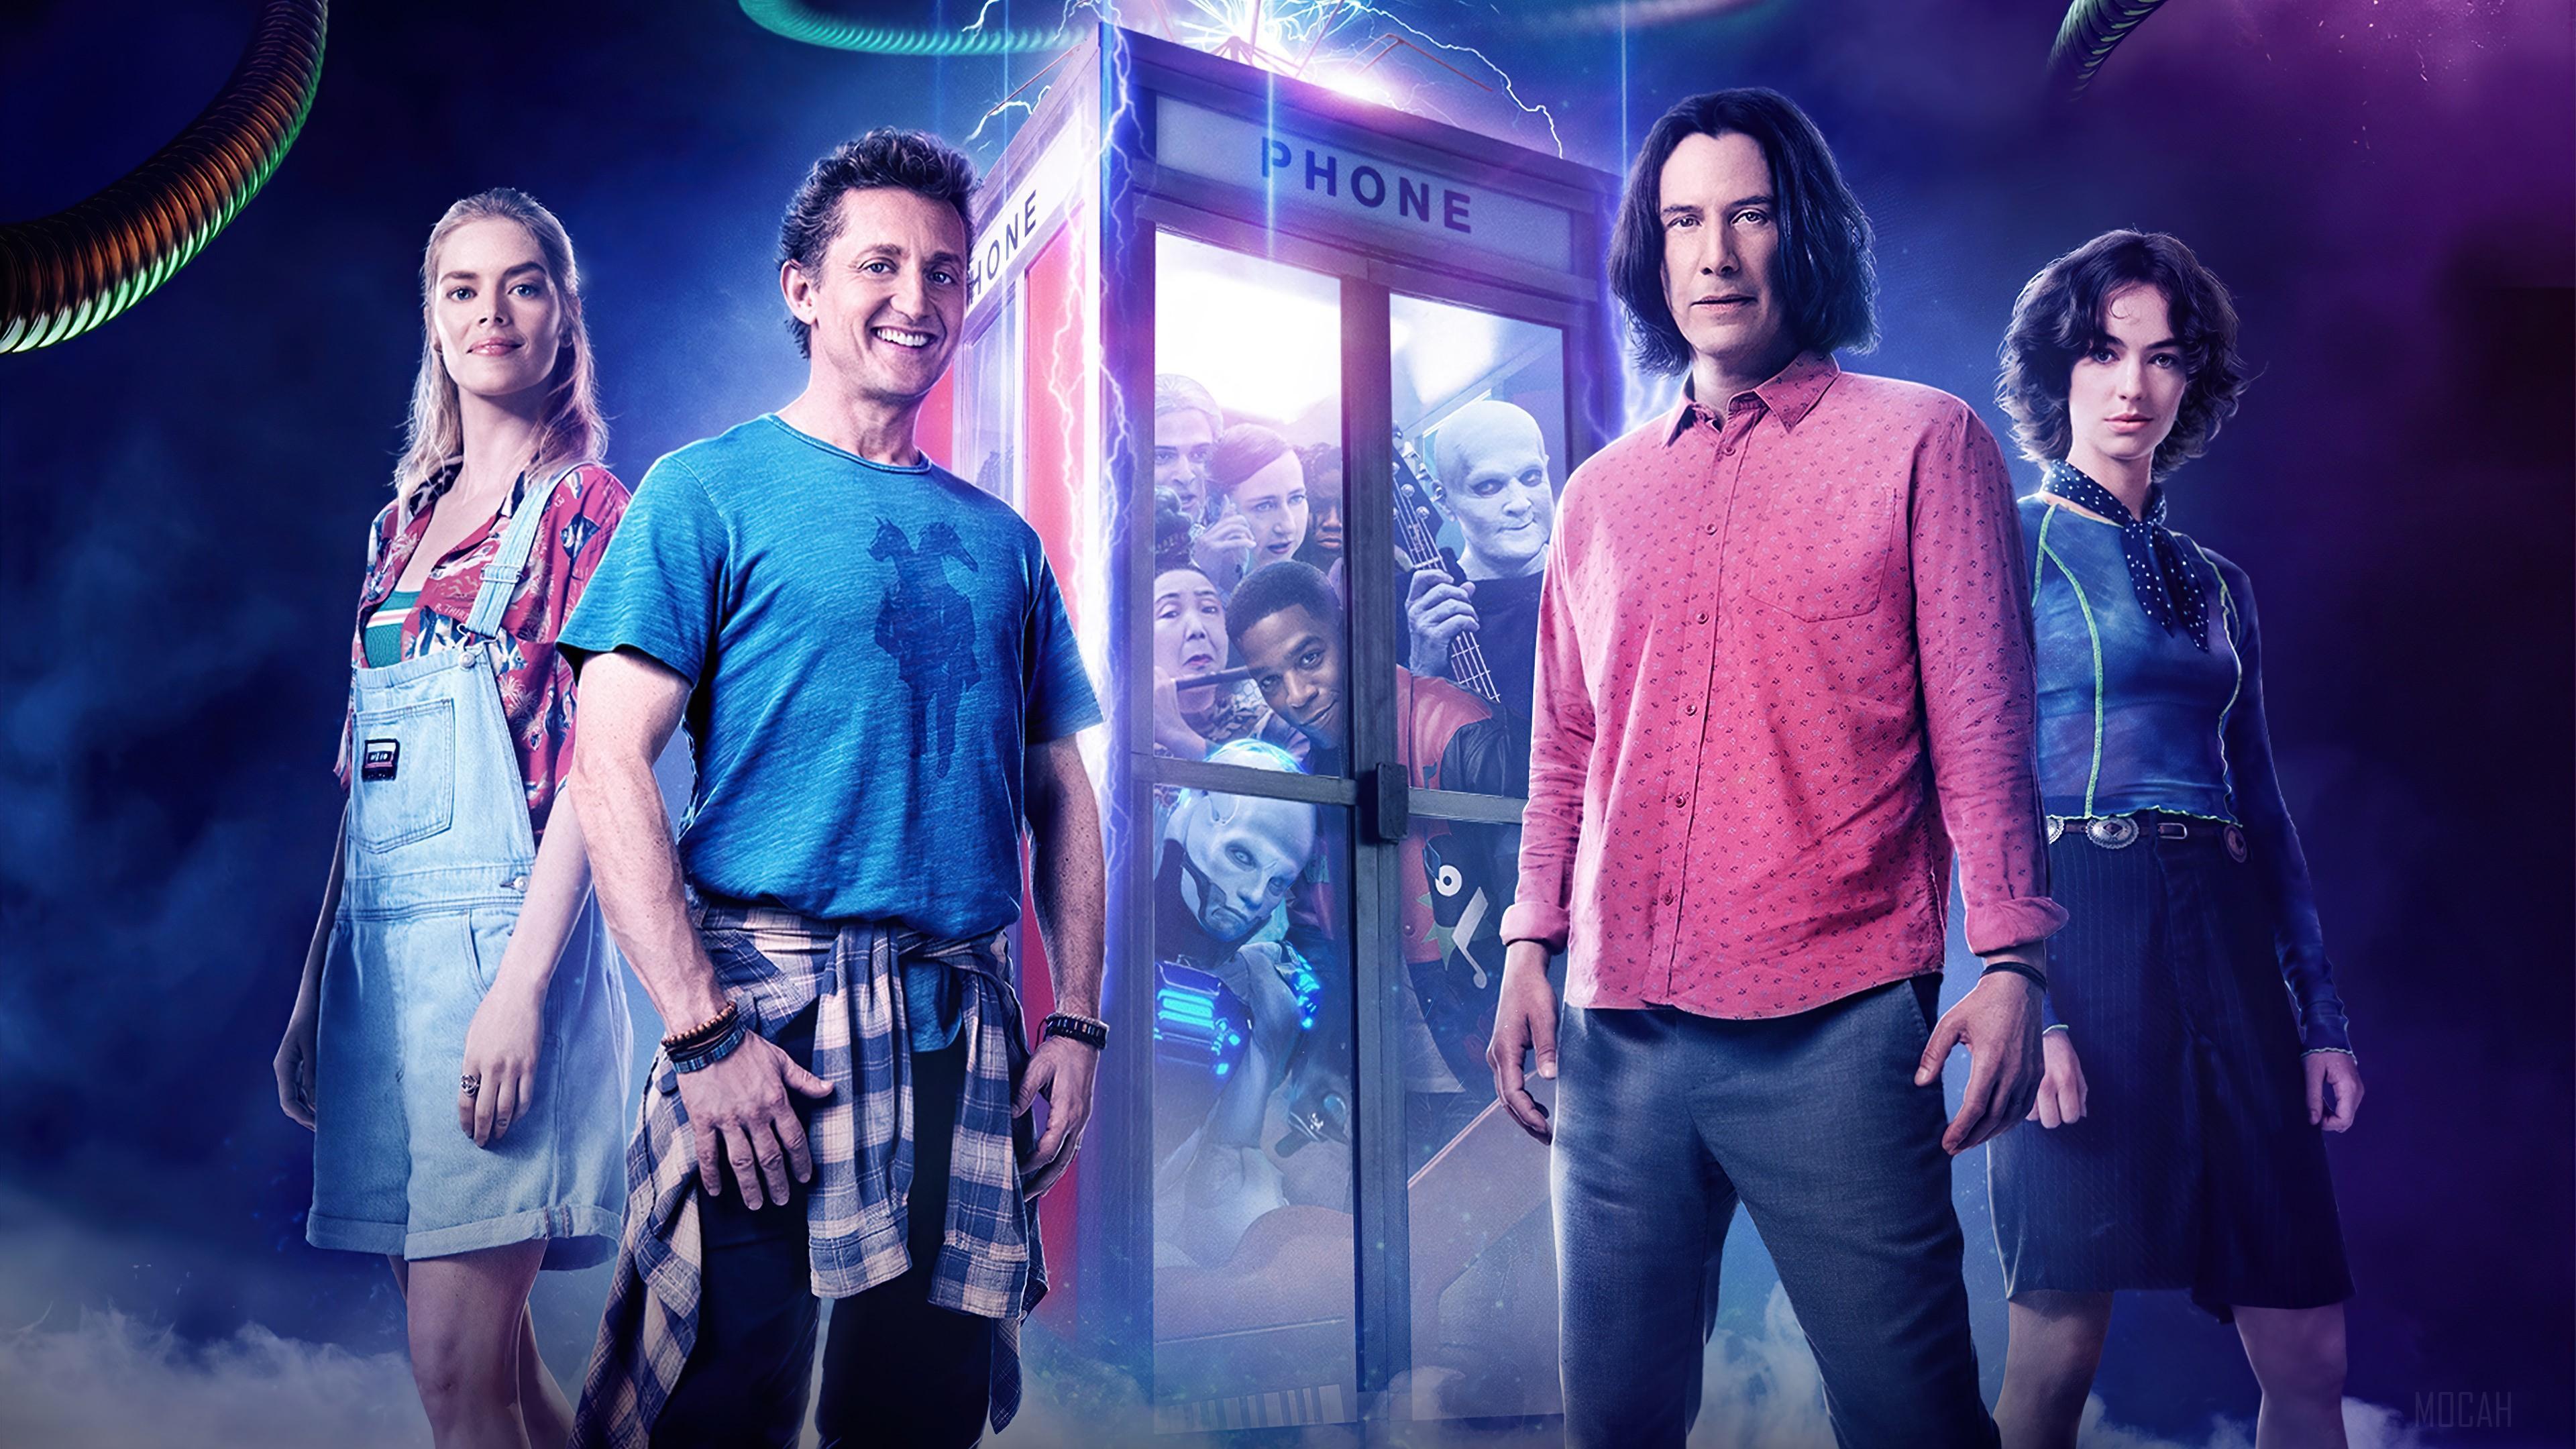 HD wallpaper, Cast, Video Game, Alex Winter, Samara Weaving, Brigette Lundy Paine 4K, Characters, Poster, Bill And Ted Face The Music, Keanu Reeves